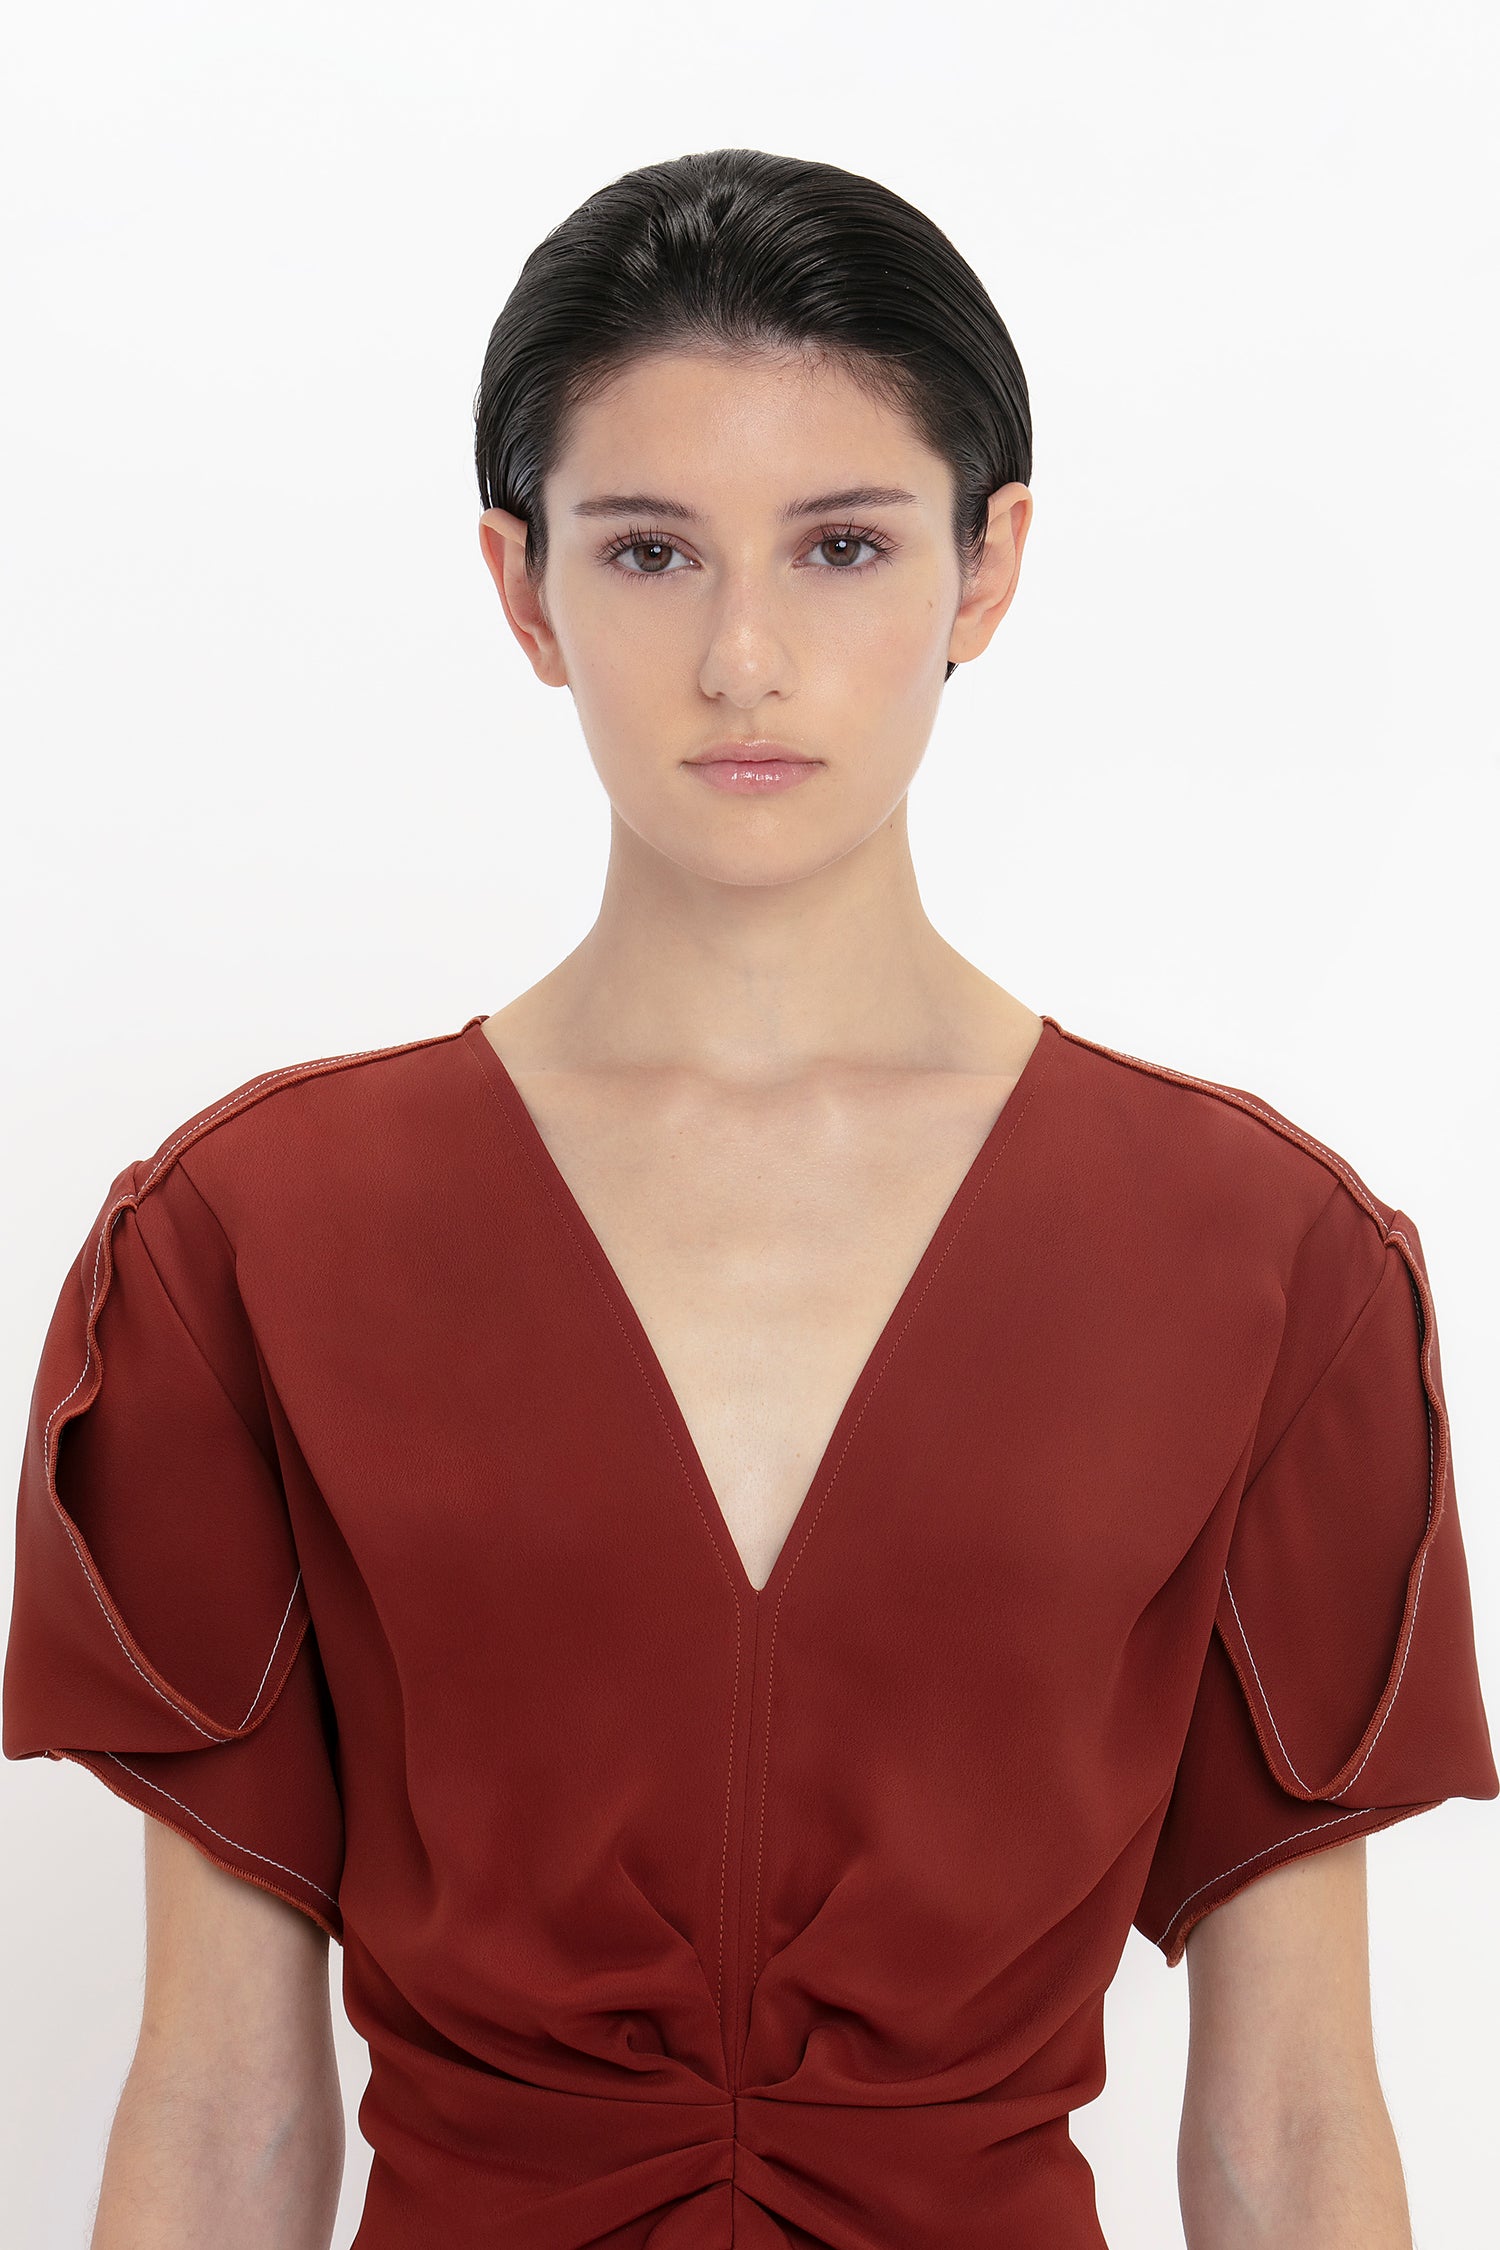 Person with short dark hair wearing a Victoria Beckham Gathered V-Neck Midi Dress in Russet, standing against a plain white background.